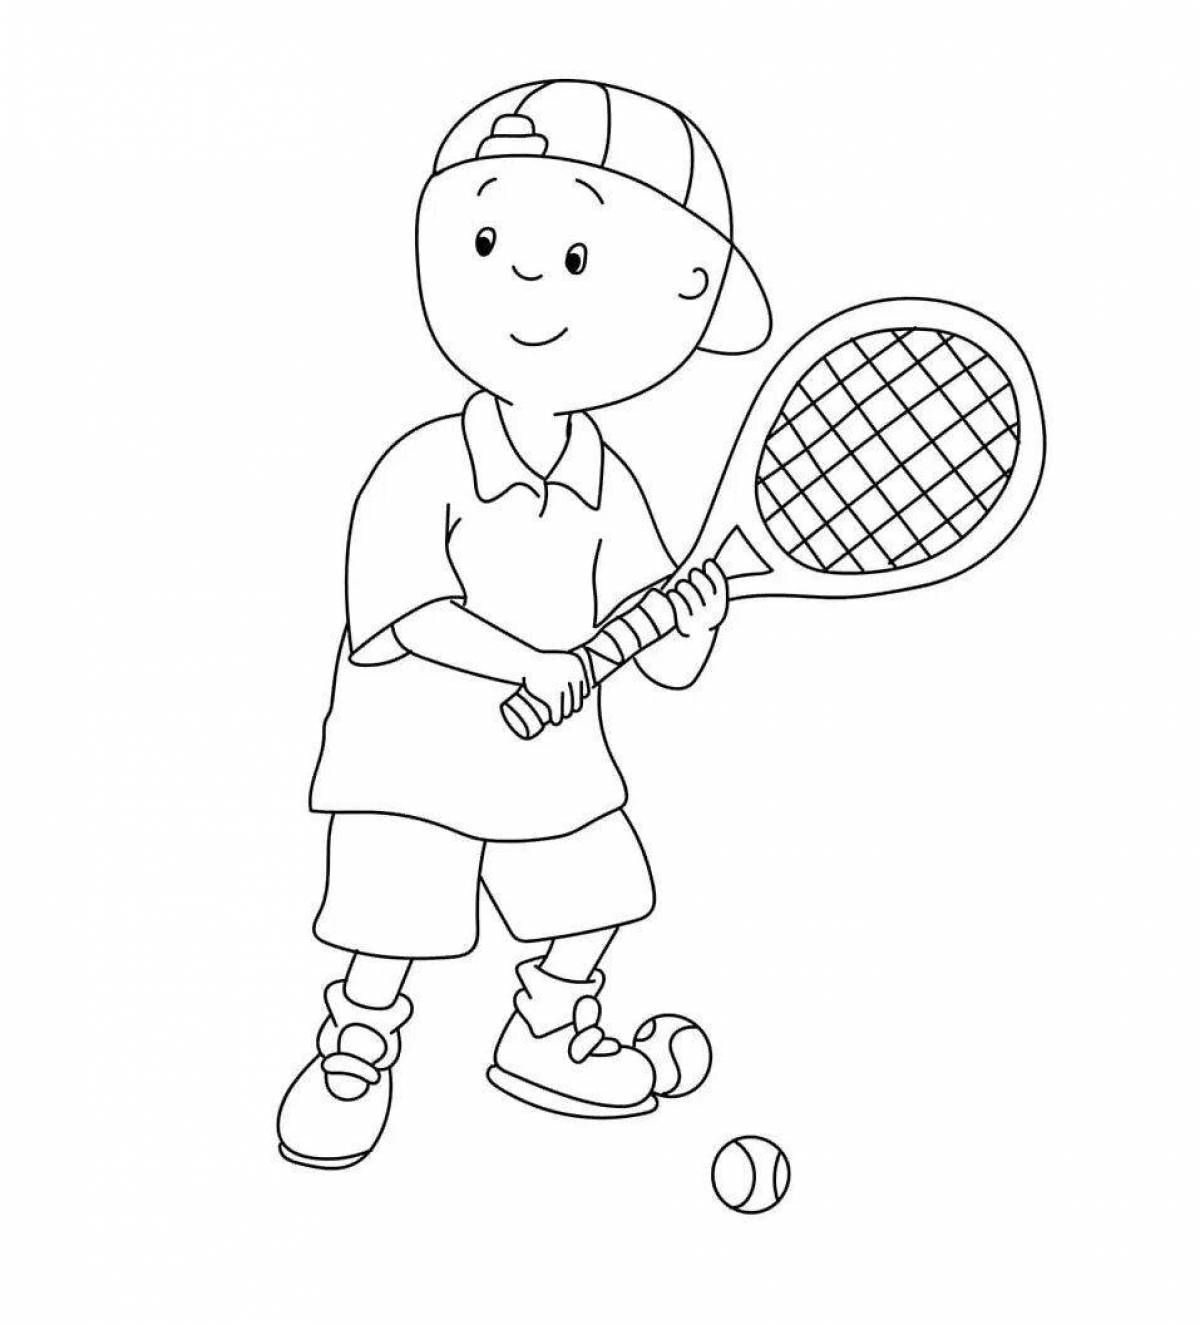 Great summer sports coloring page